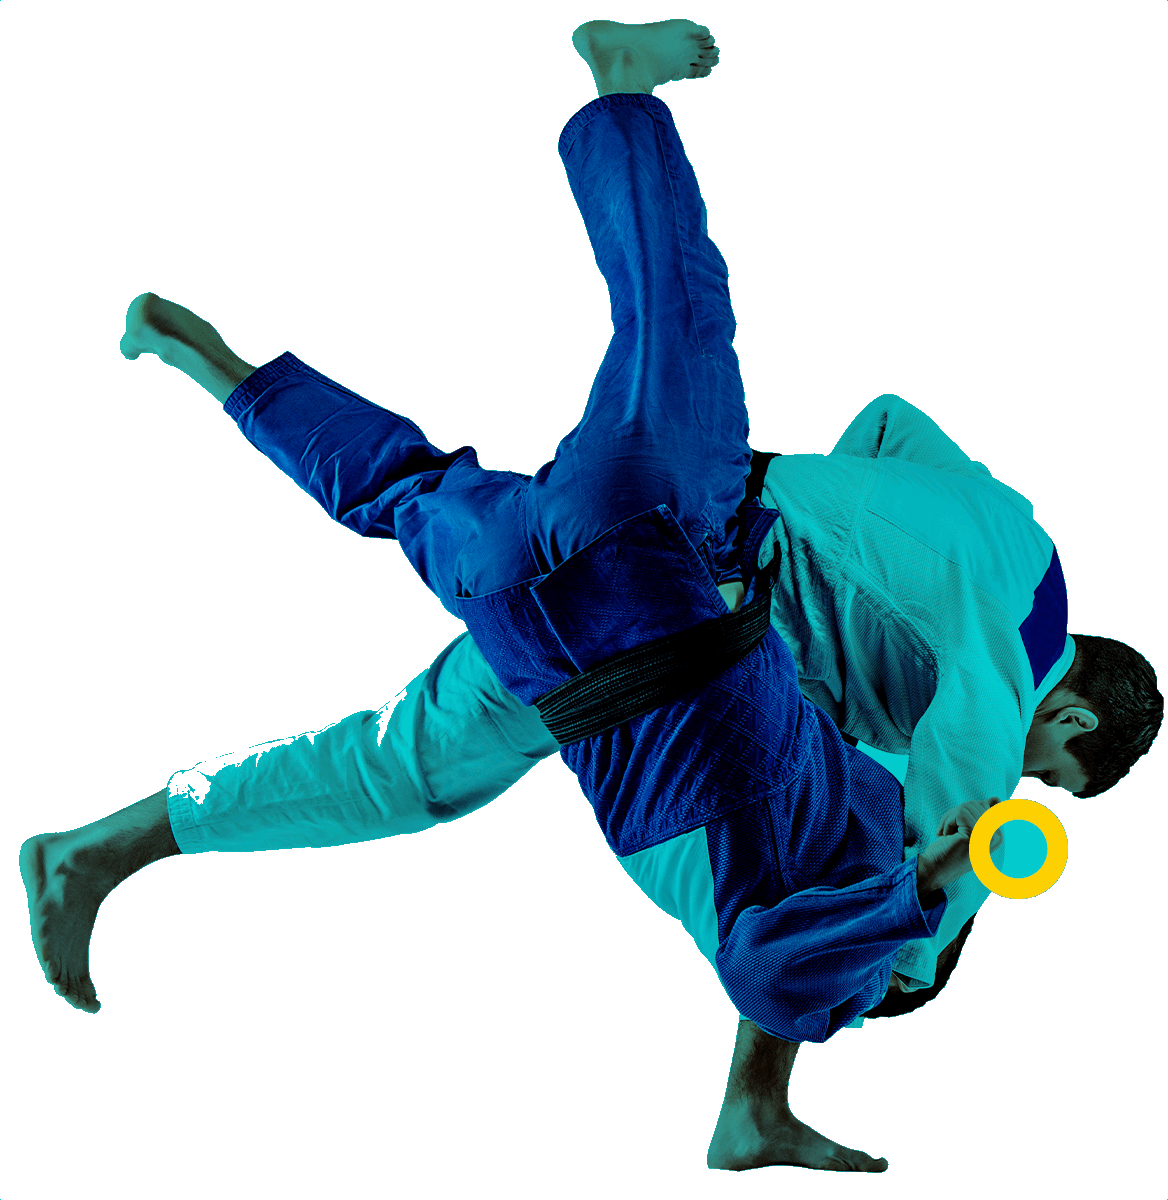 In the picture there is a male judoka making a maneuver of this discipline that is making a opponent fall to the ground.